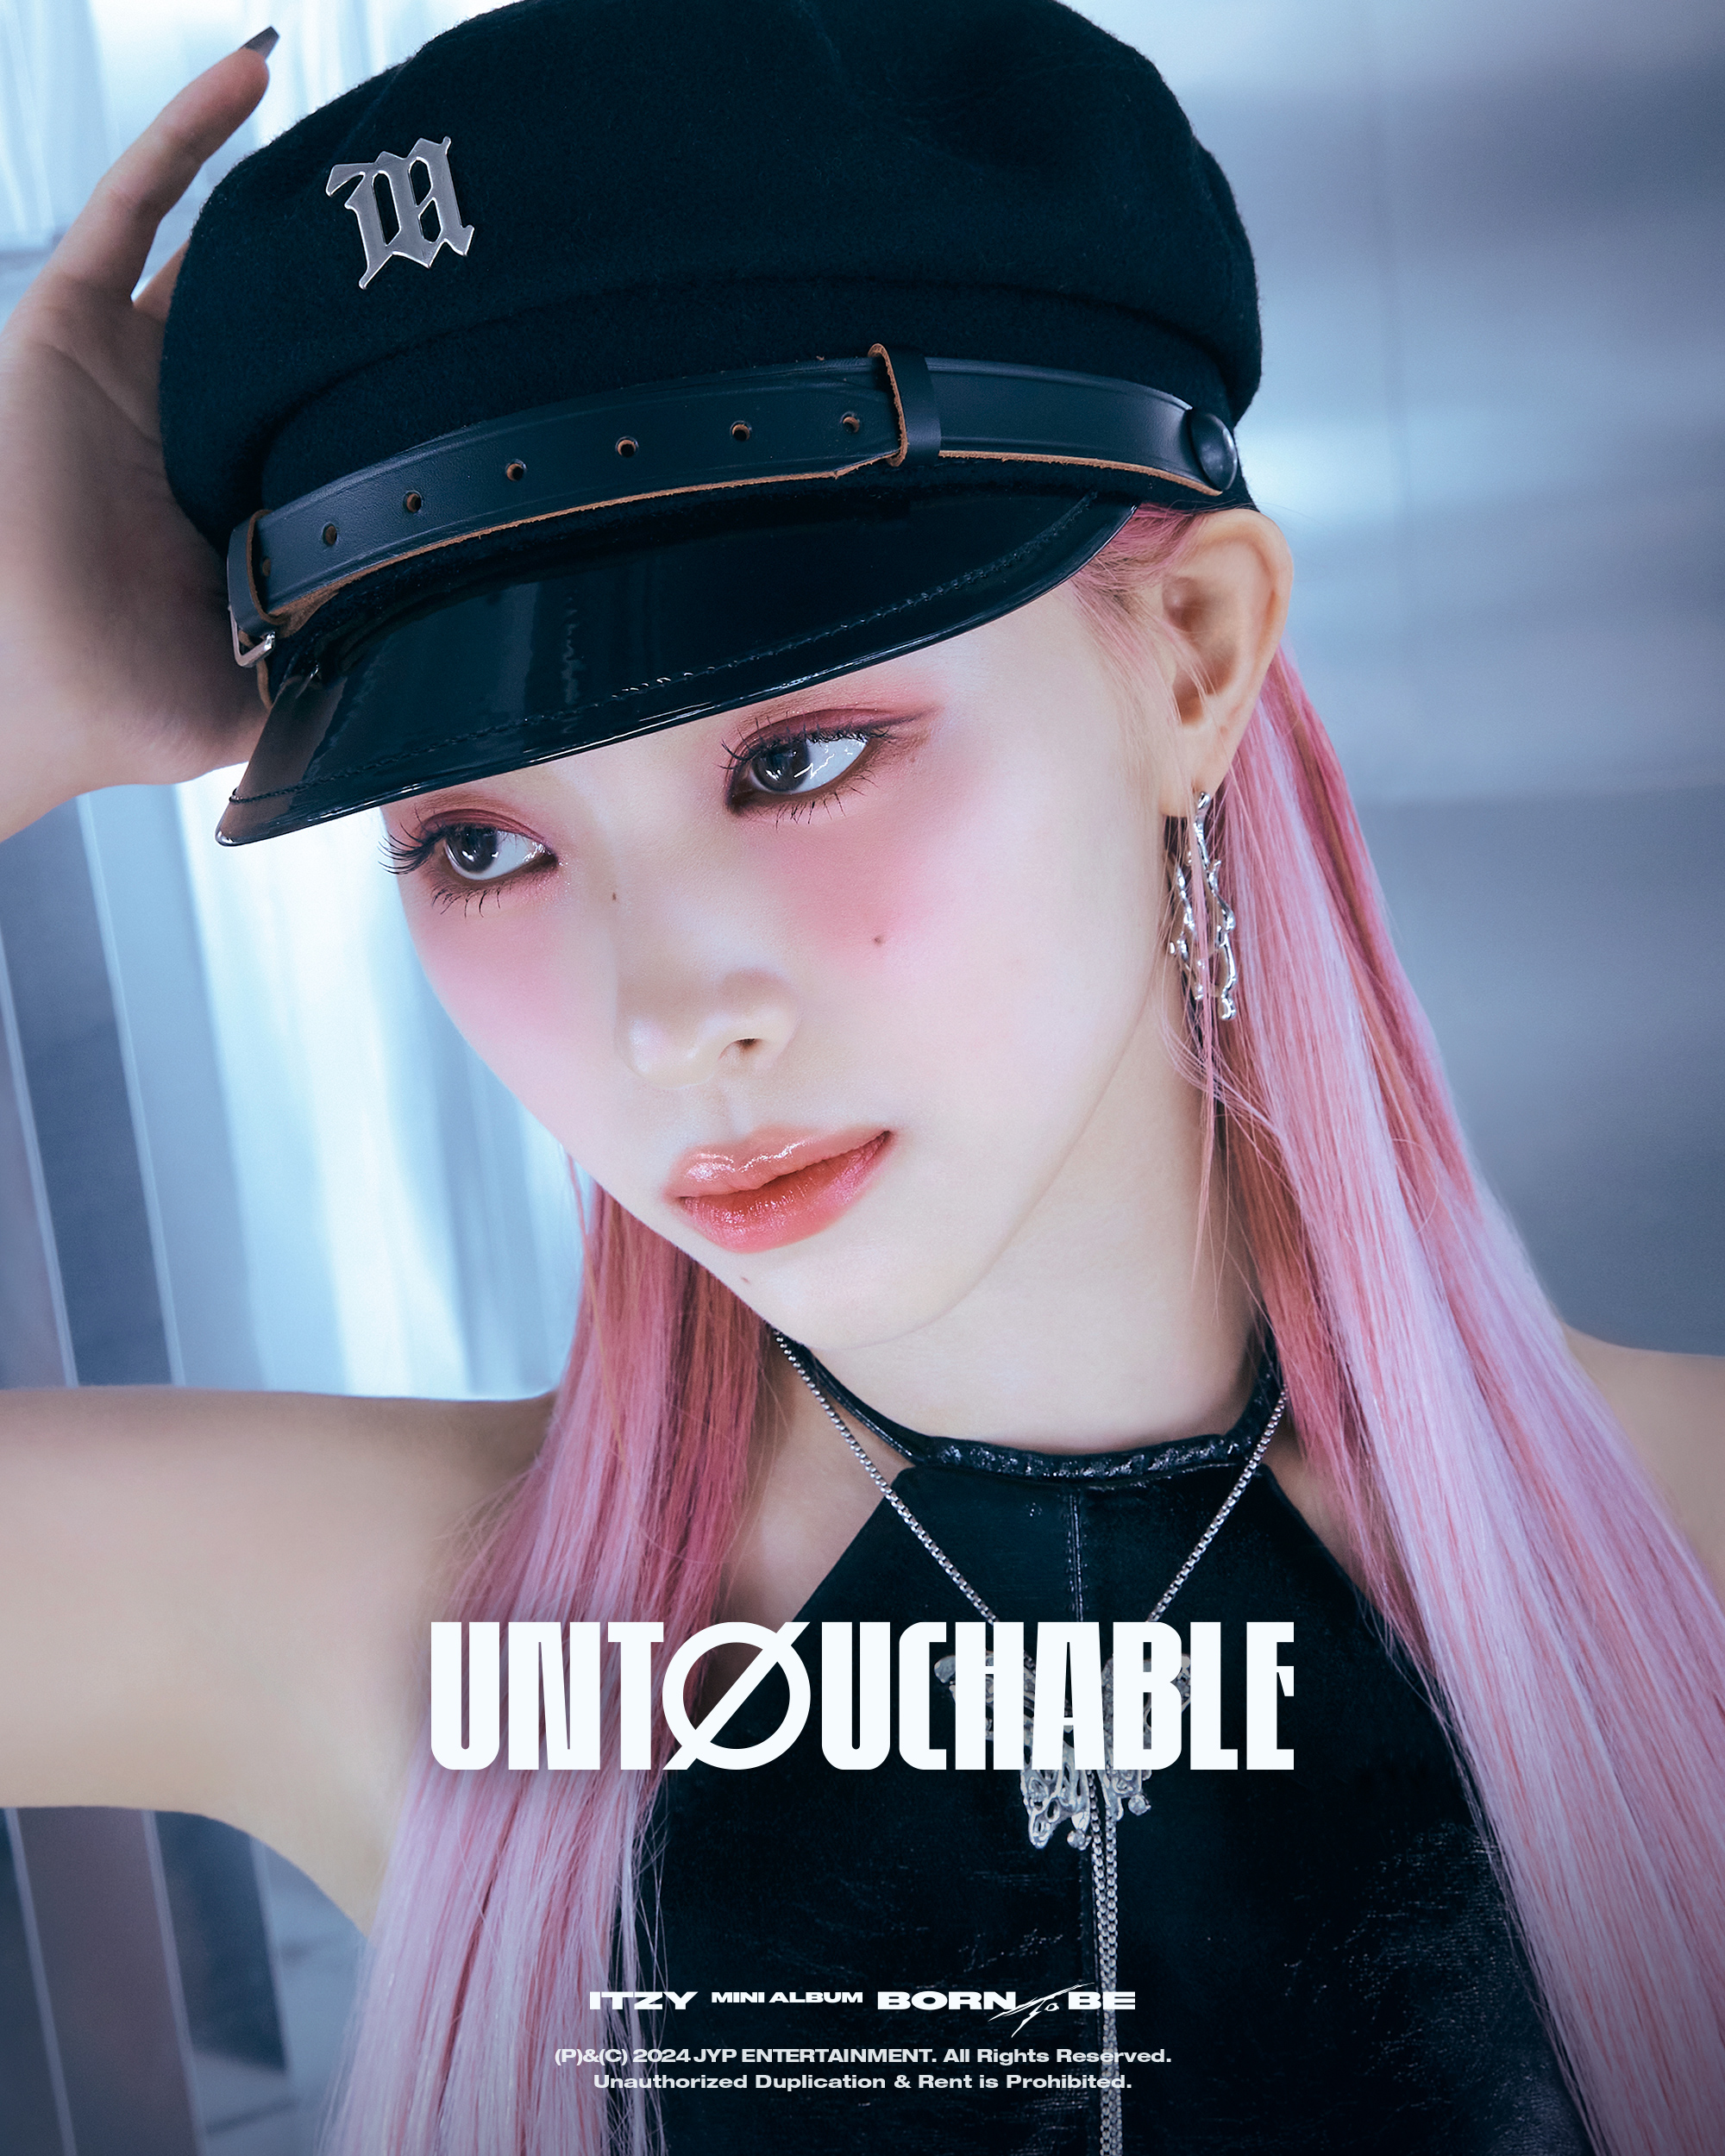 ITZY 'BORN TO BE' CONCEPT PHOTO